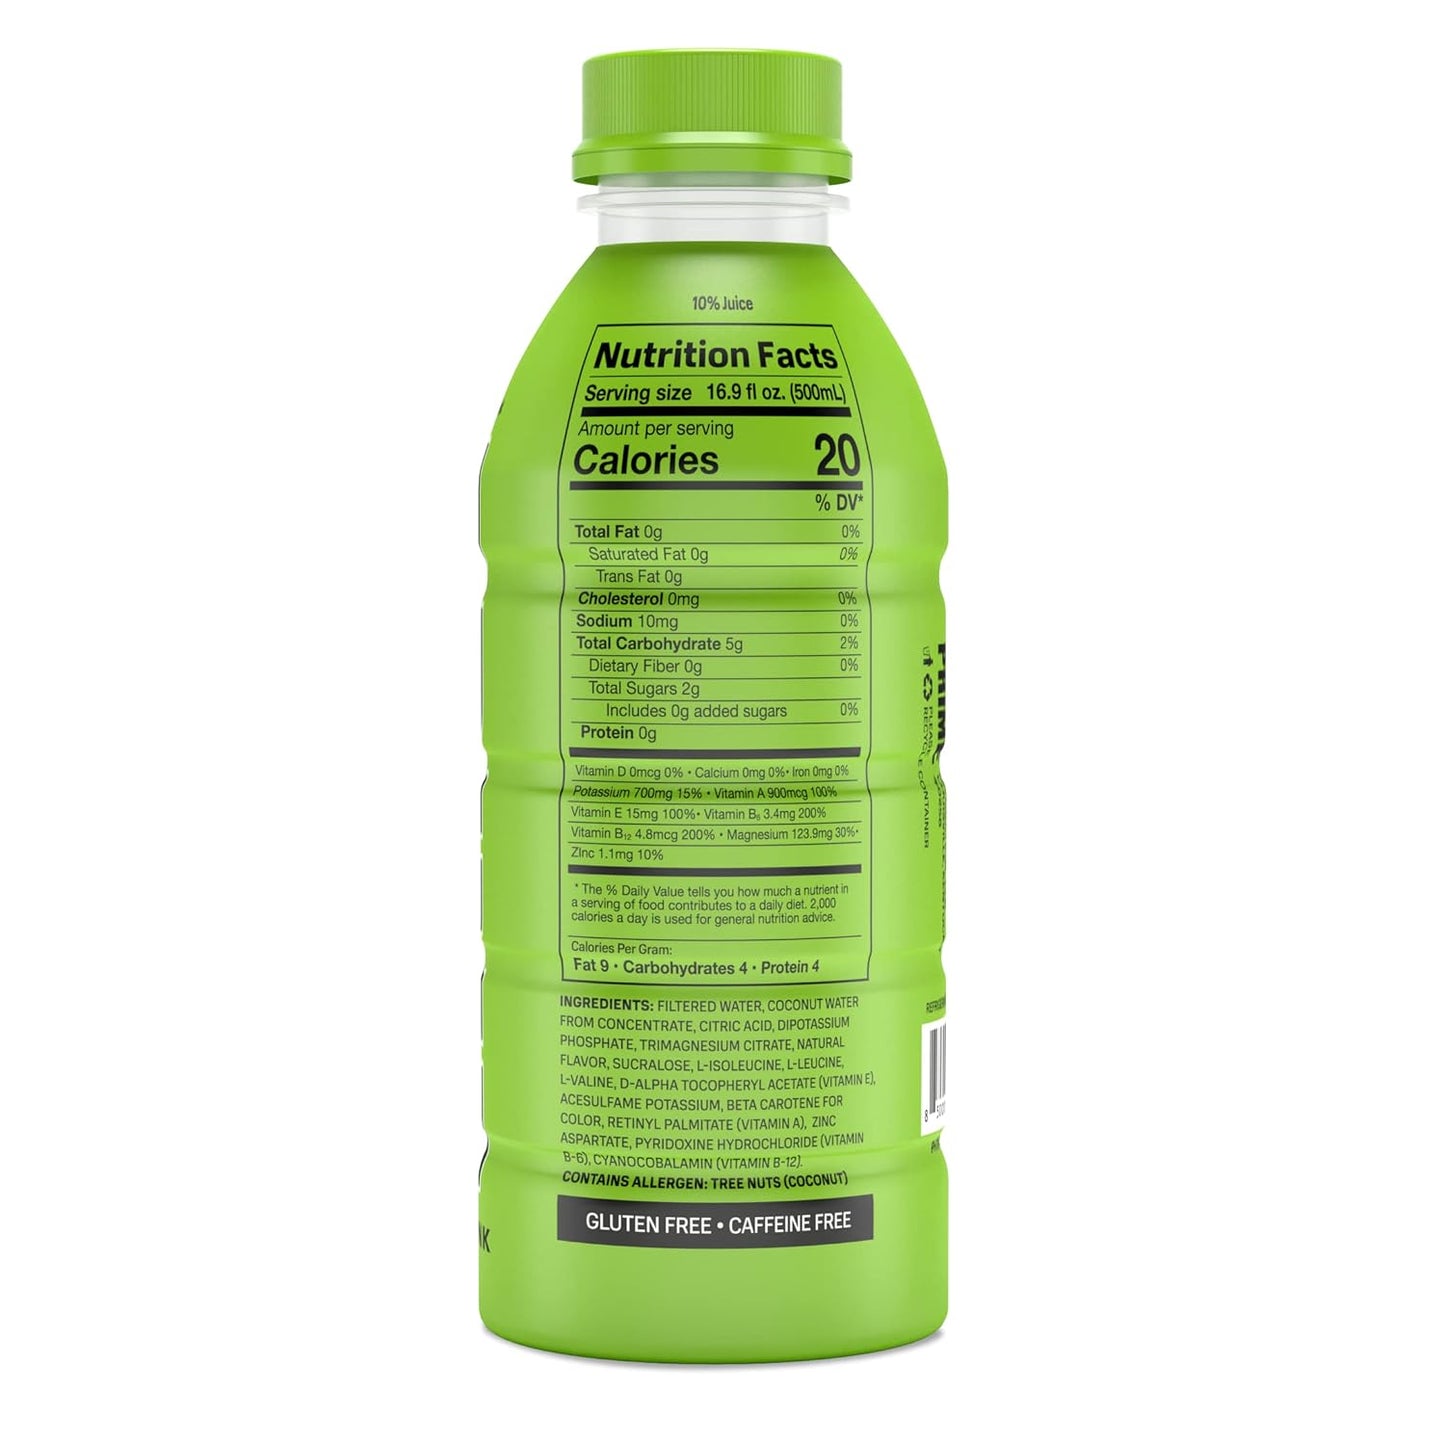 Prime Hydration with BCAA Blend for Muscle Recovery - Lemon Lime (12 Drinks, 16 Fl Oz. Each)